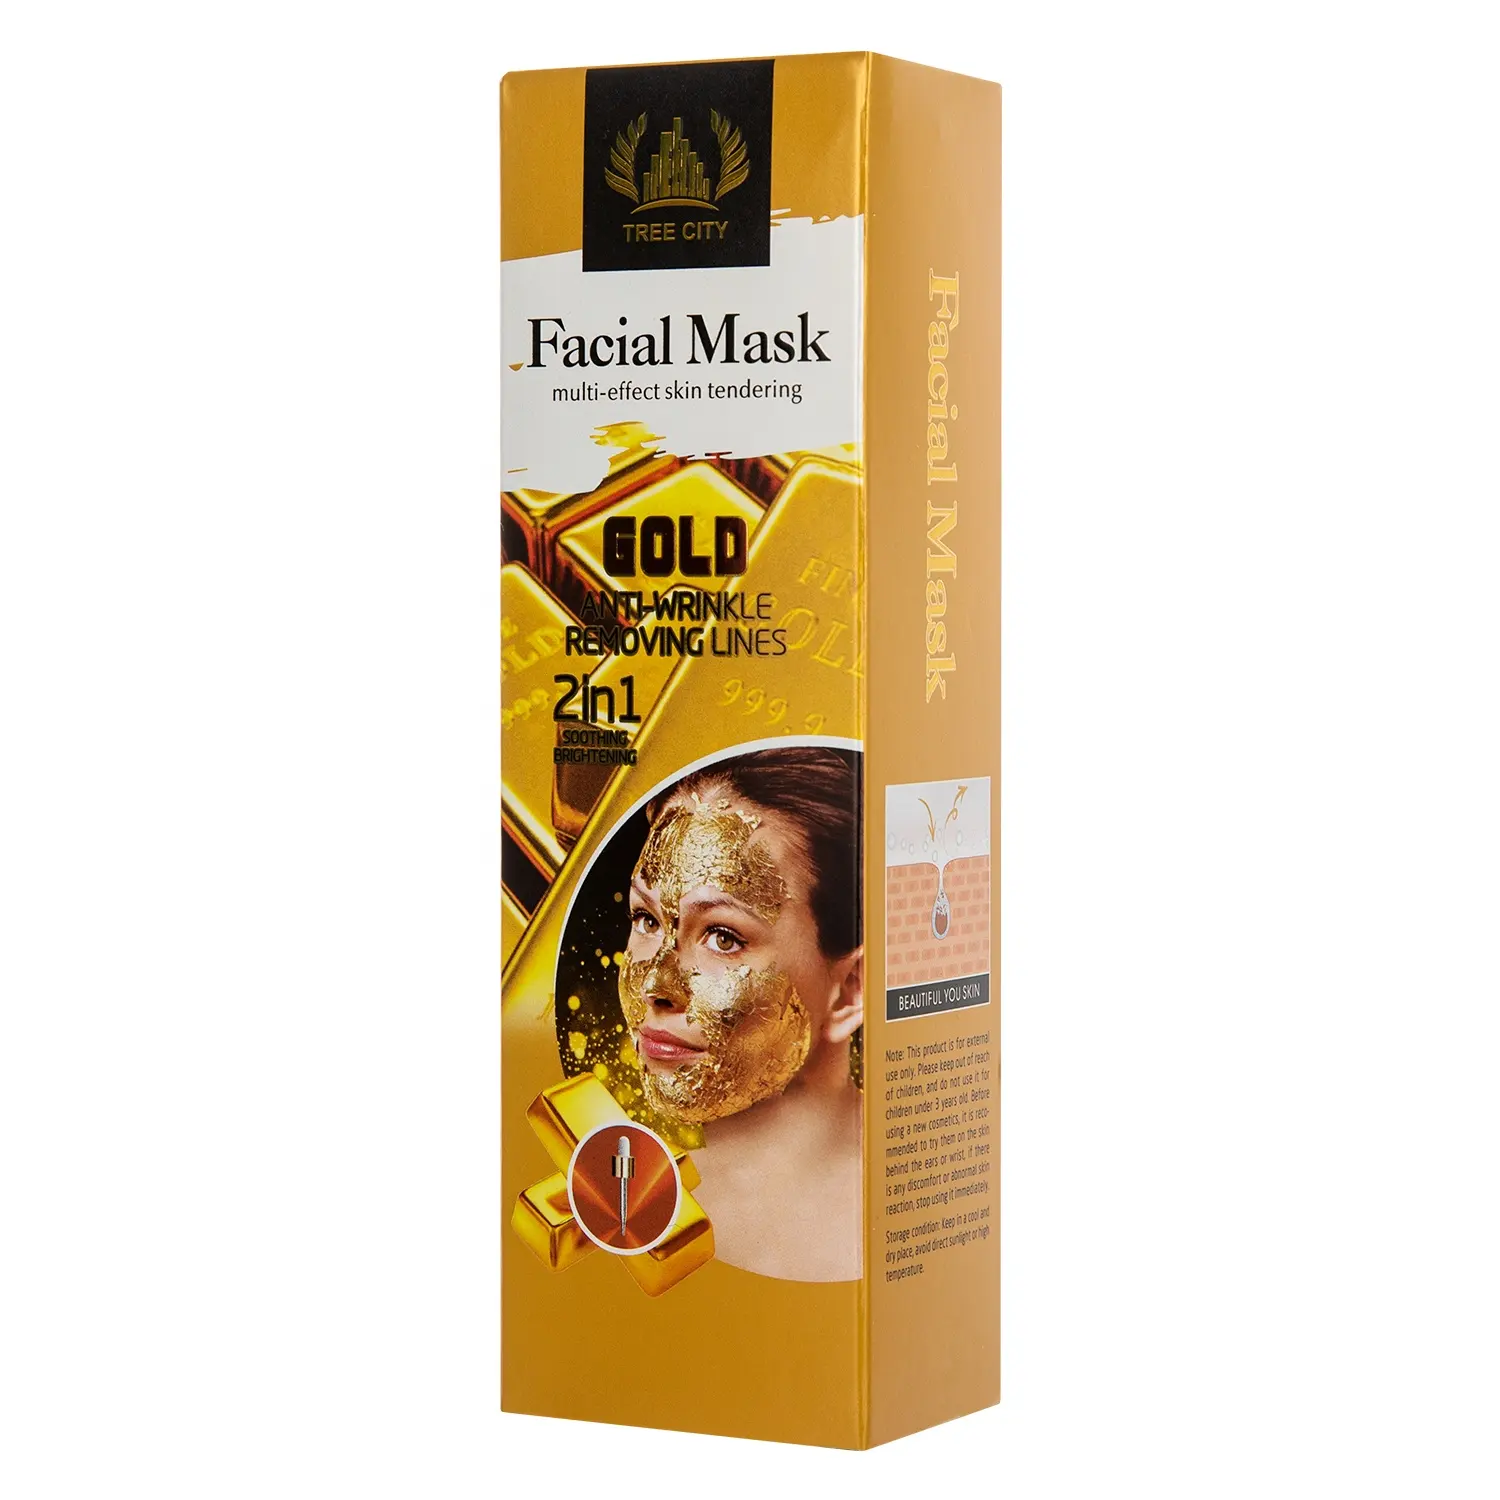 Hot Selling Multi-effect Skin Tendering Anti-wrinkle Removing Lines Cleaning And Shrinking Pores Gold Facial Mask